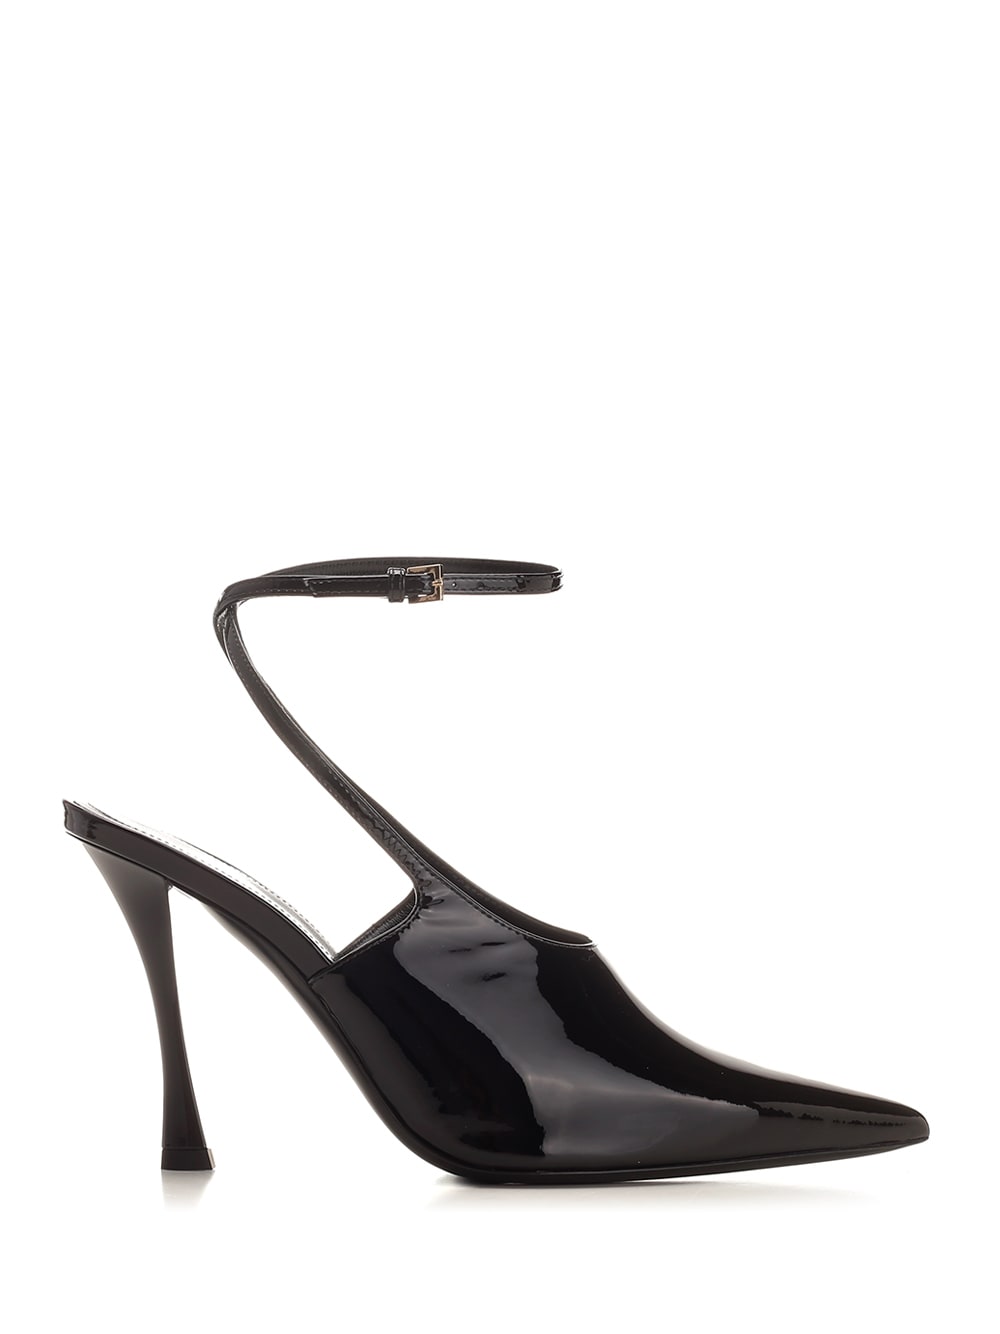 Patent Leather show Pump